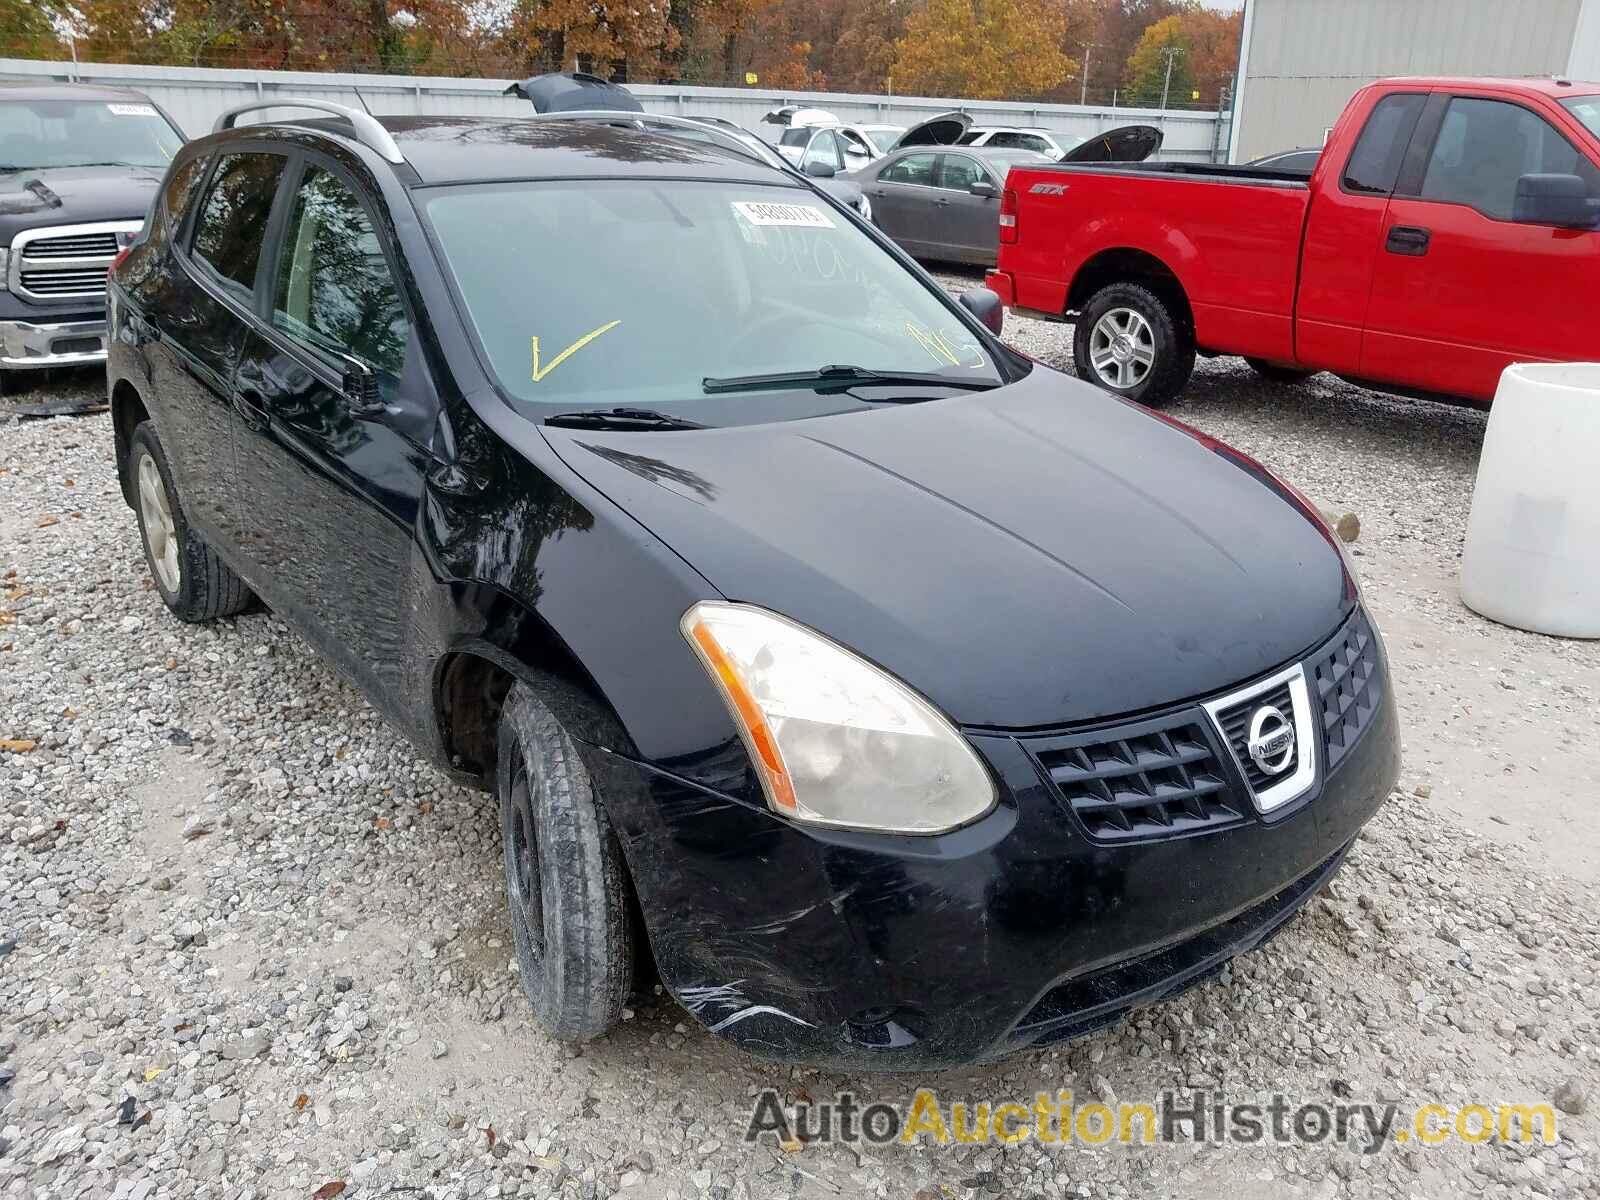 2009 NISSAN ROGUE S S, JN8AS58T59W041328